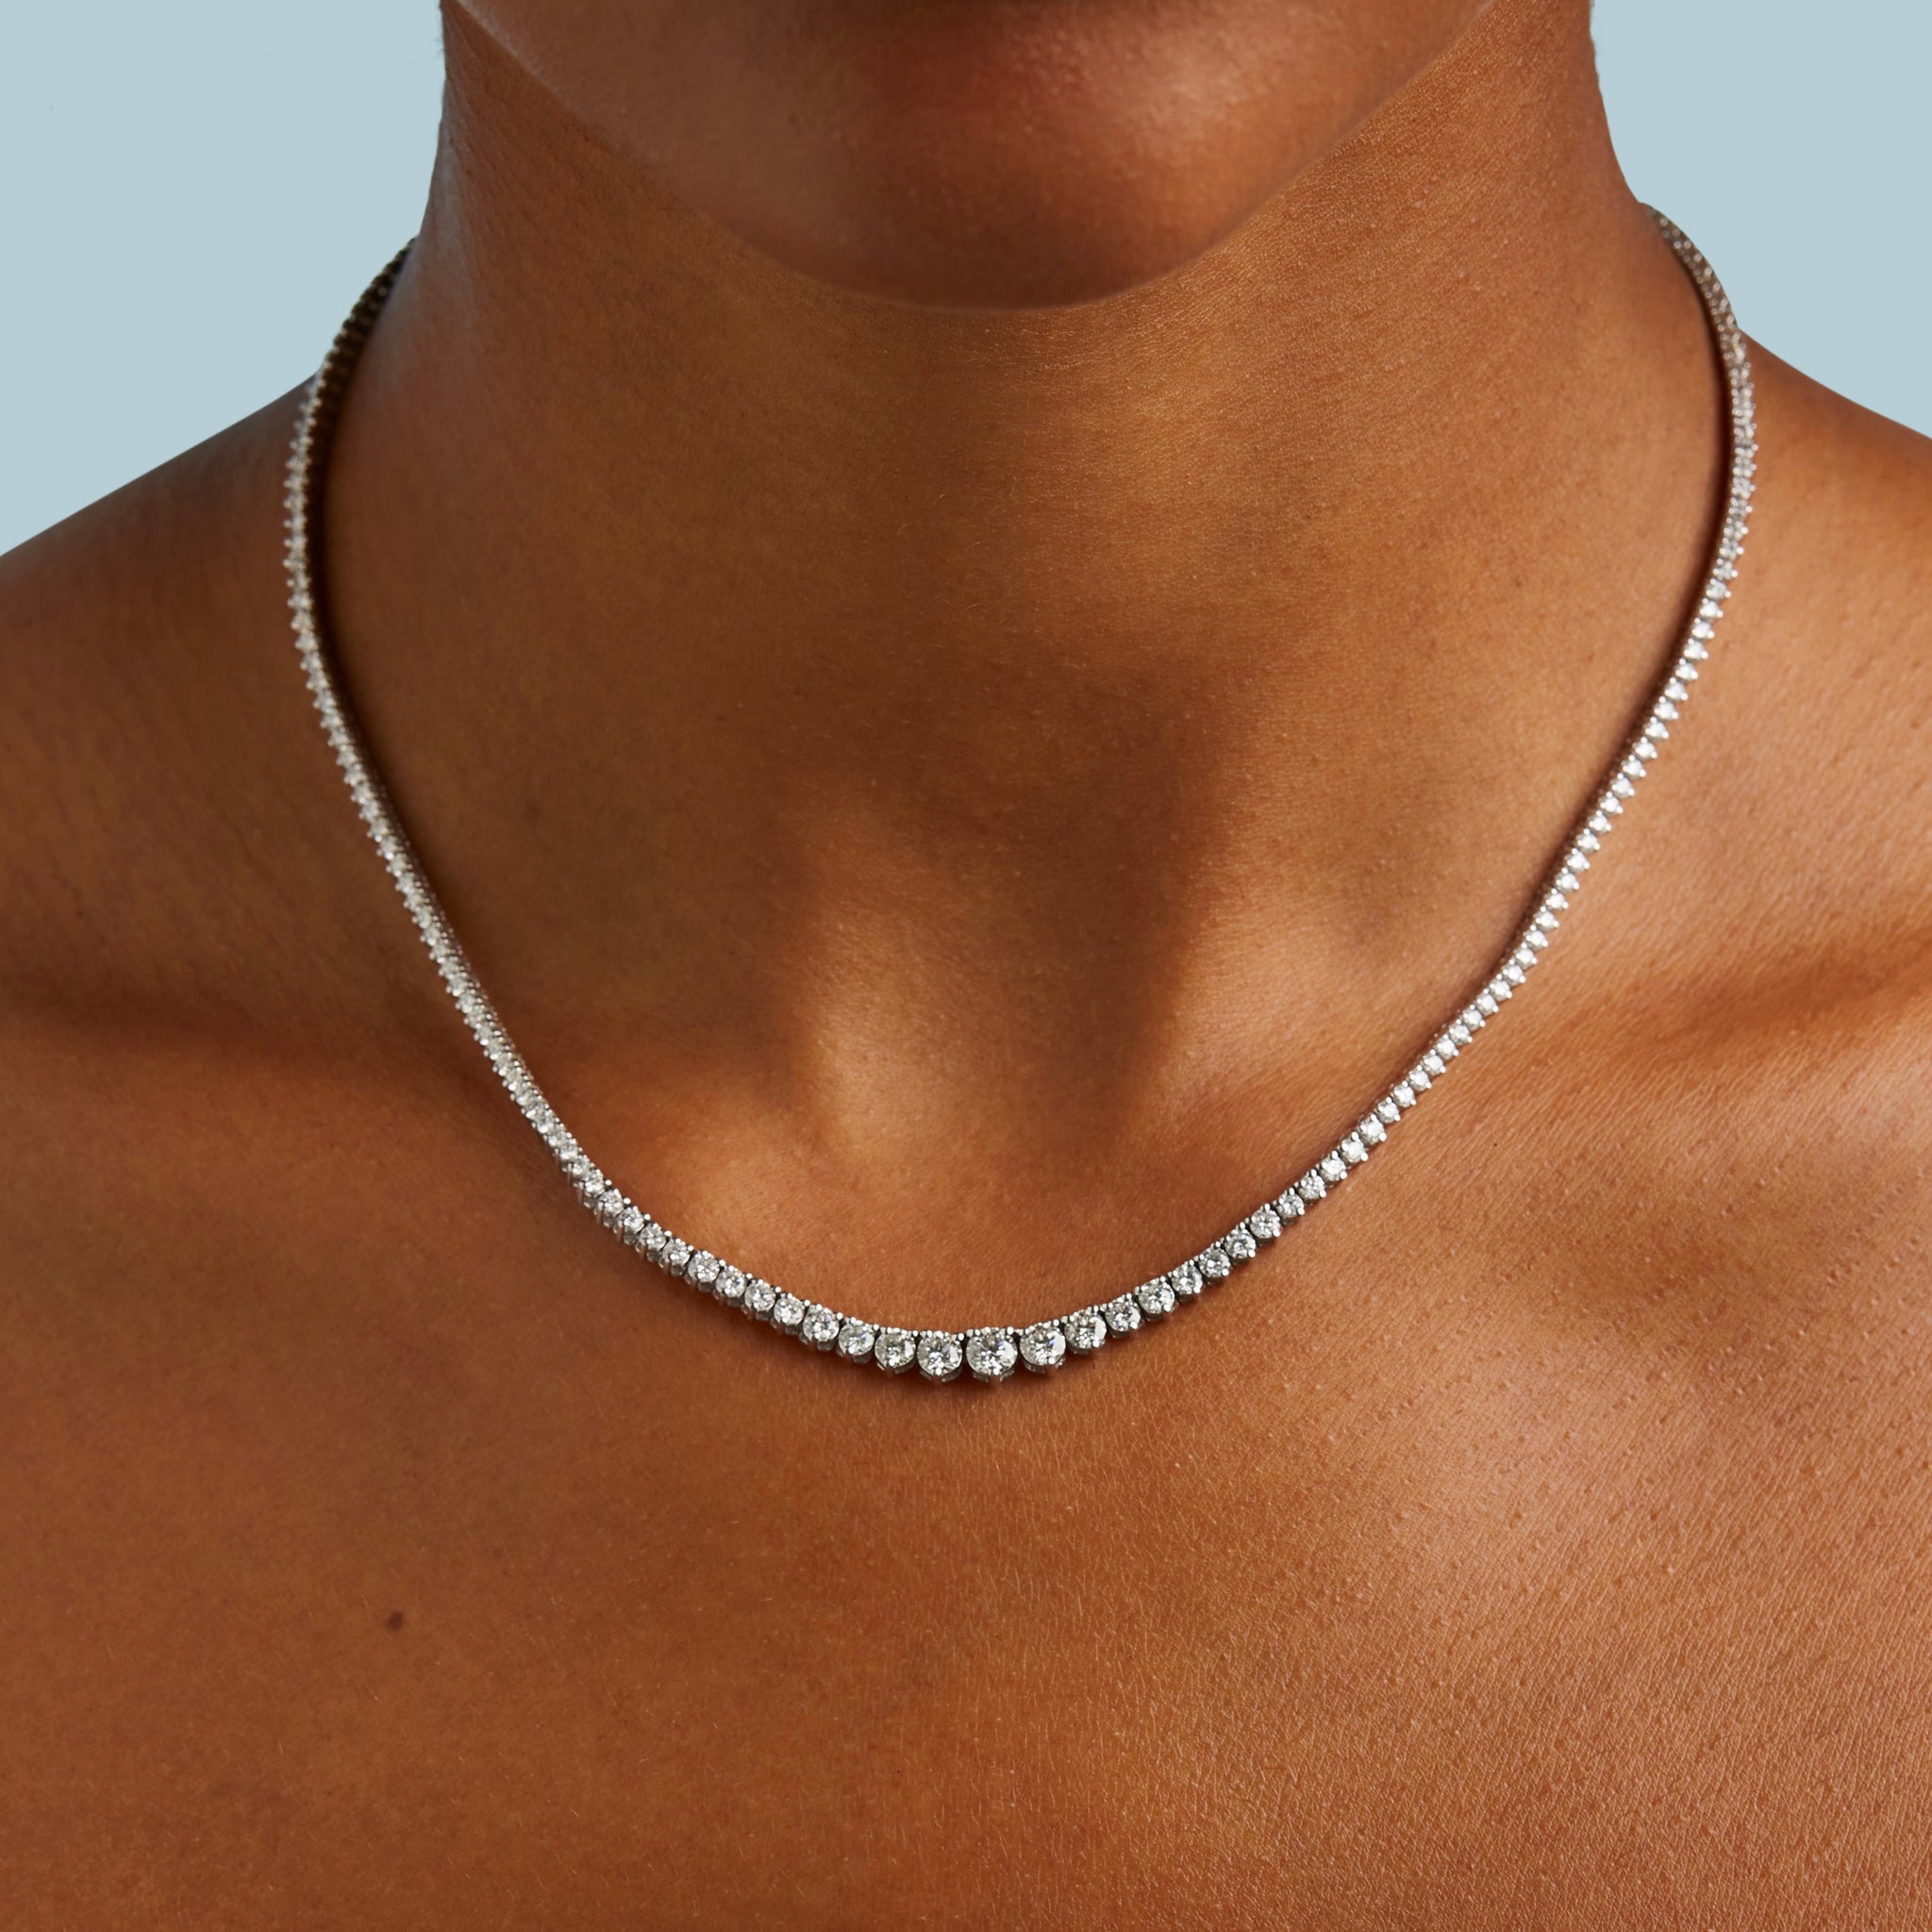 Diamond Riviera Necklace – The Clear Cut